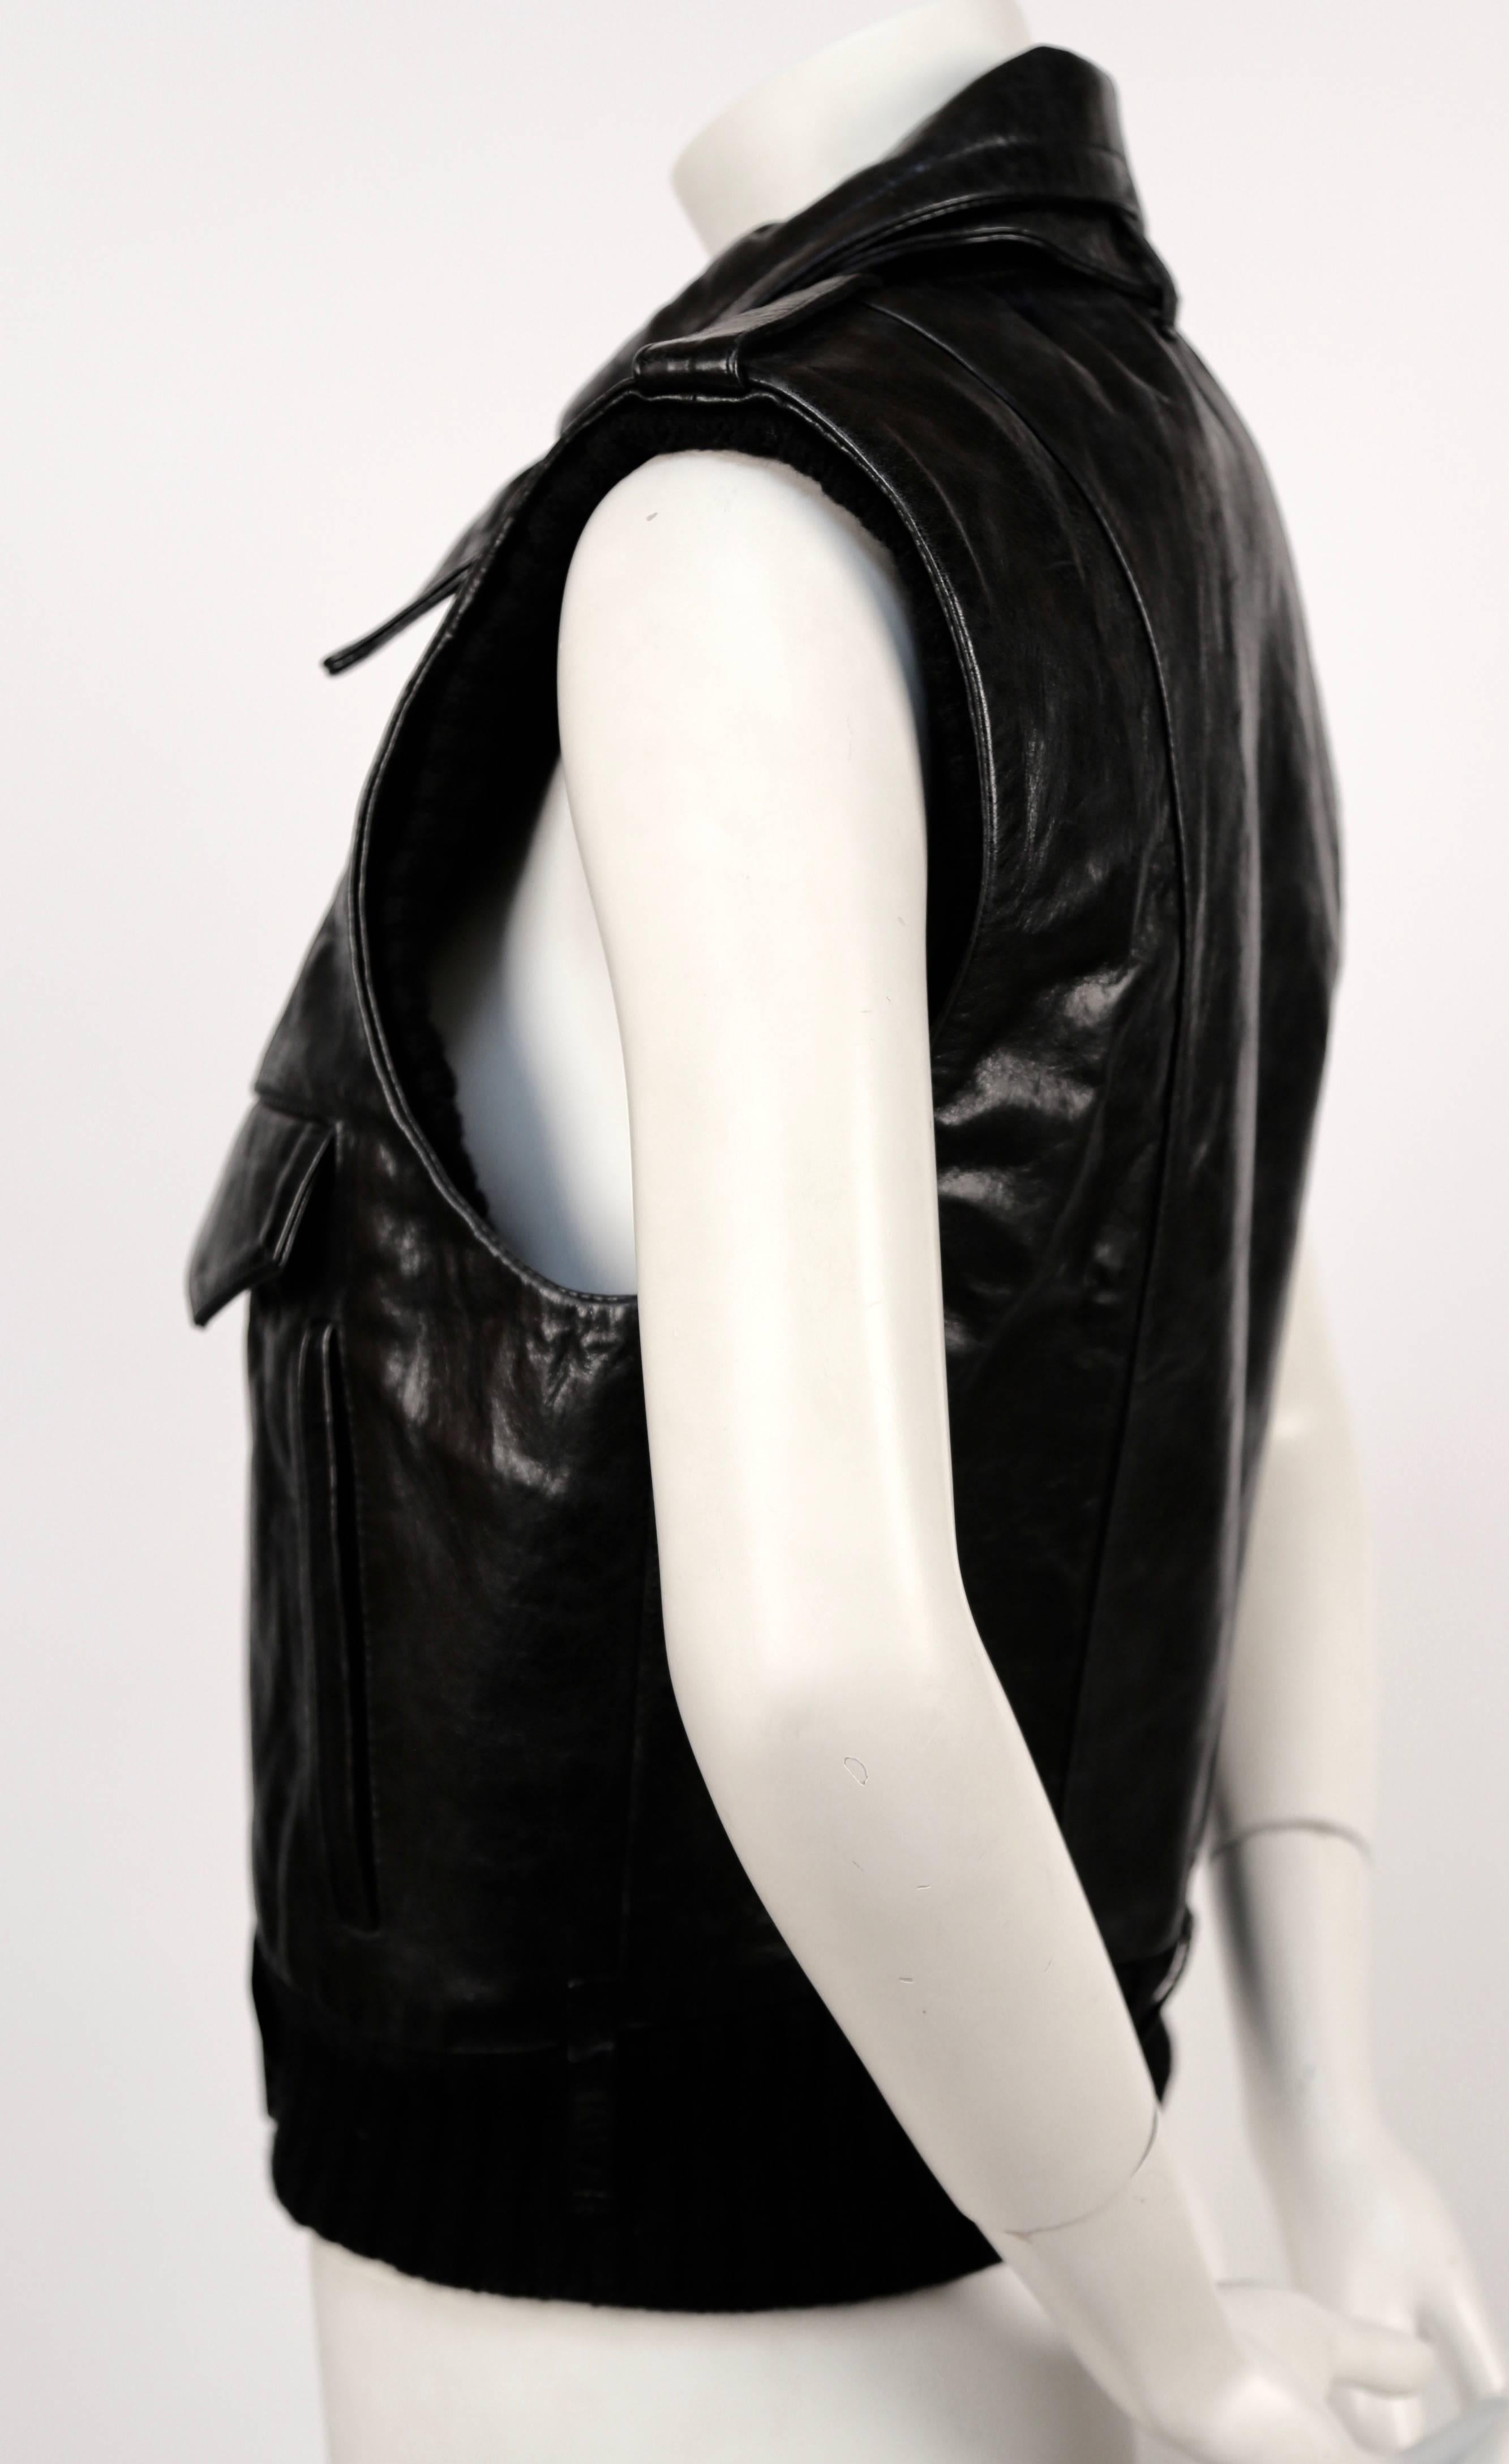 Very rare documented leather vest with wool trim designed by Nicolas Ghesquière for Balenciaga as seen on the runway for fall of 2002. Labeled a French size 40. Approximate measurements: shoulder 15